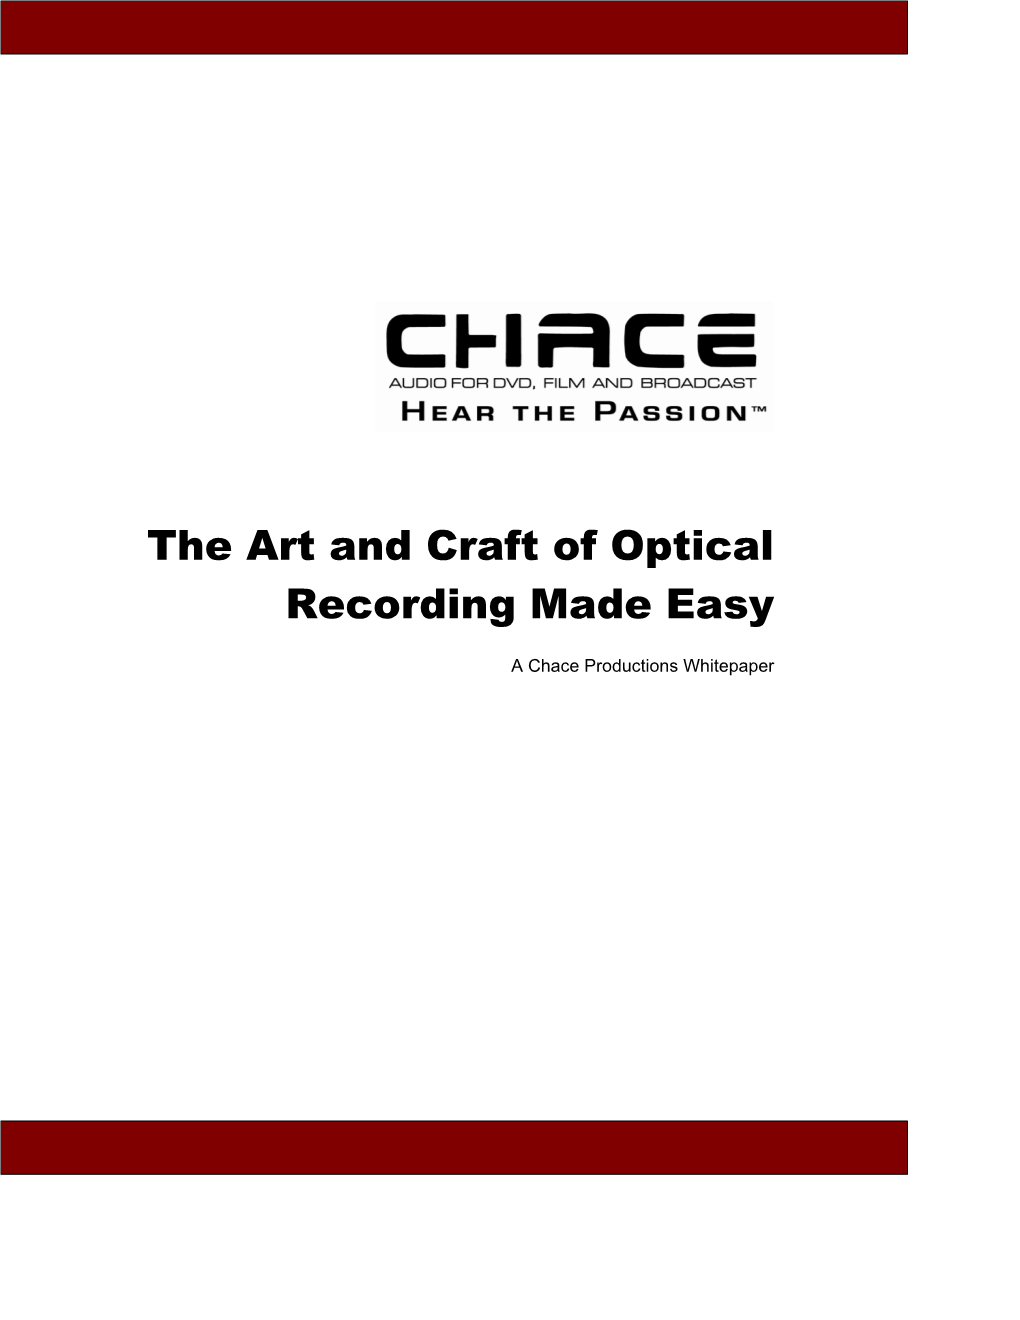 The Art and Craft of Optical Recording Made Easy